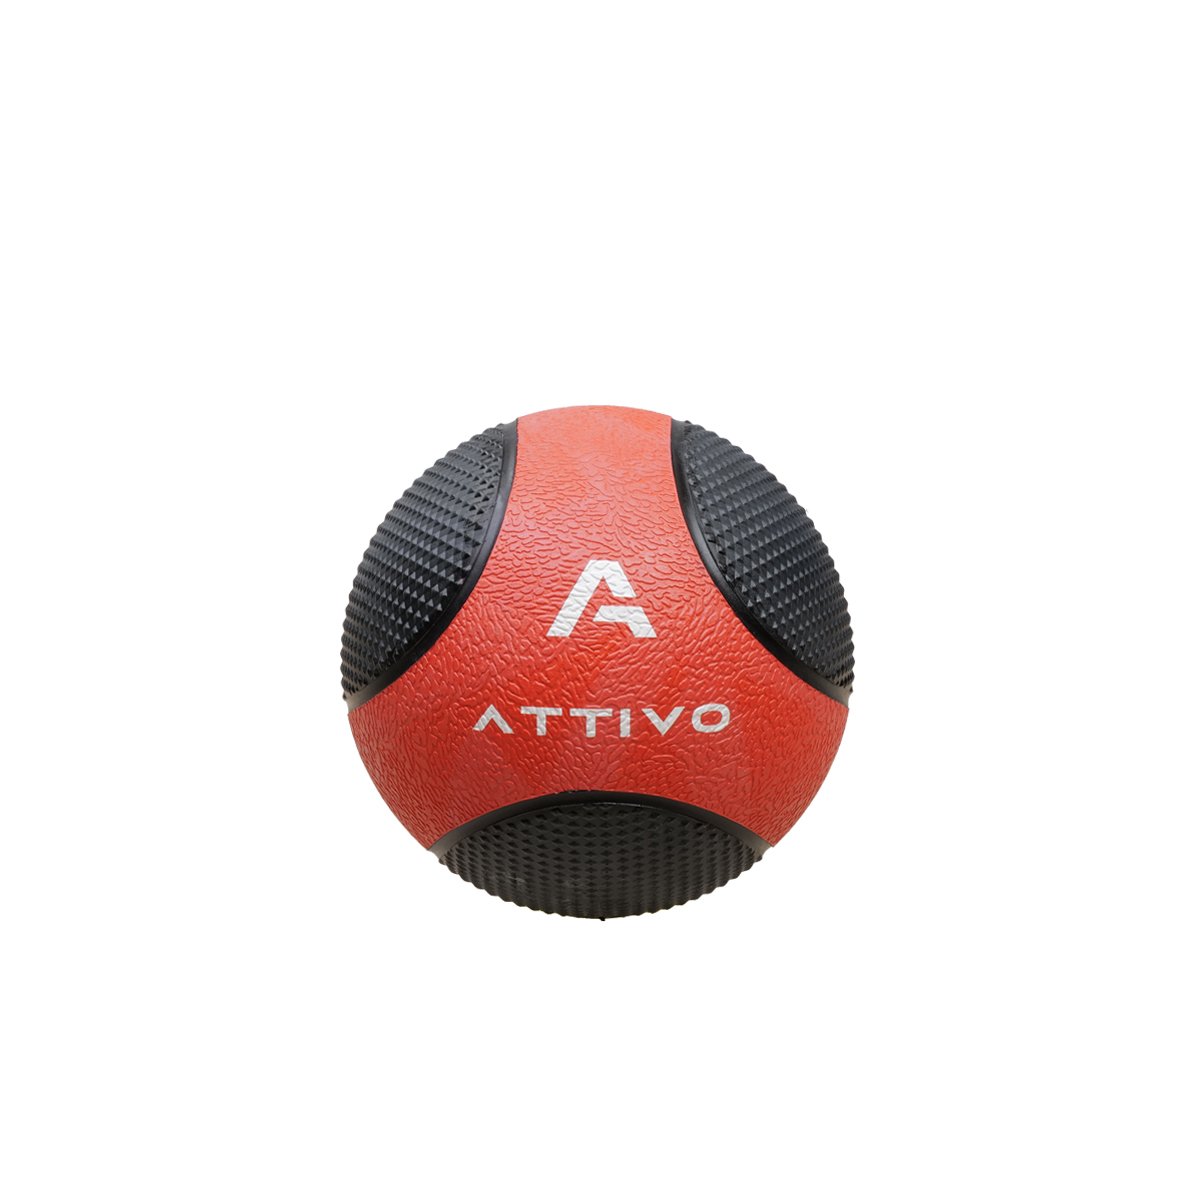 ATTIVO Medicine Ball for Workouts Exercise Balance Training - 4KG